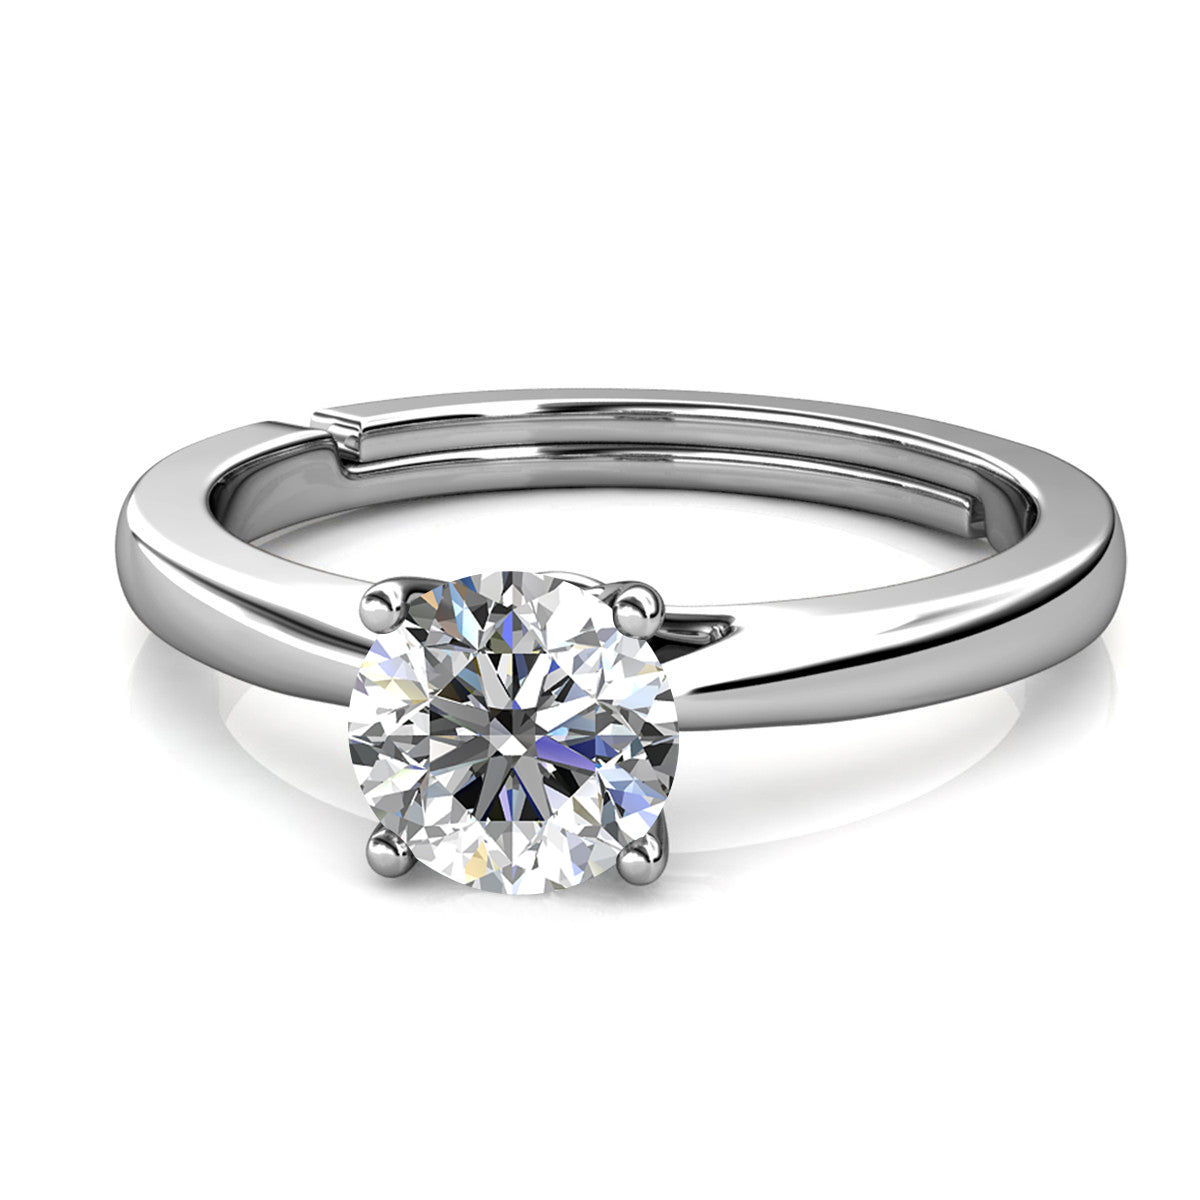 Moissanite by Cate & Chloe Abigail Sterling Silver Ring with Moissanite and 5A Cubic Zirconia Crystals